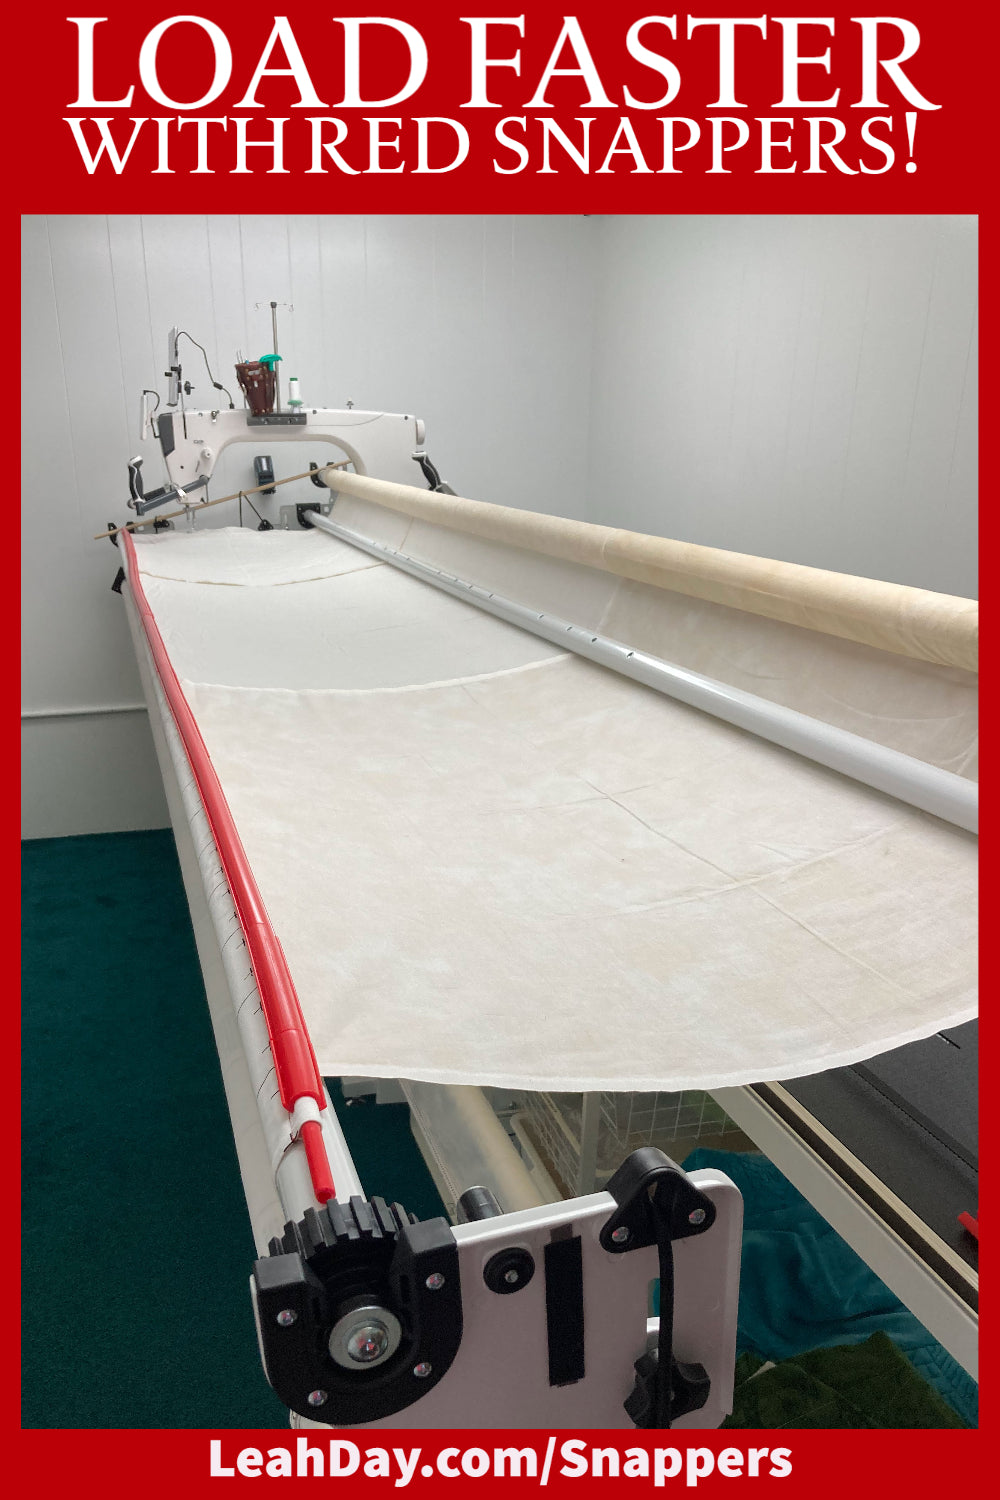 Red Snappers - Nolting Longarm Quilting Machines